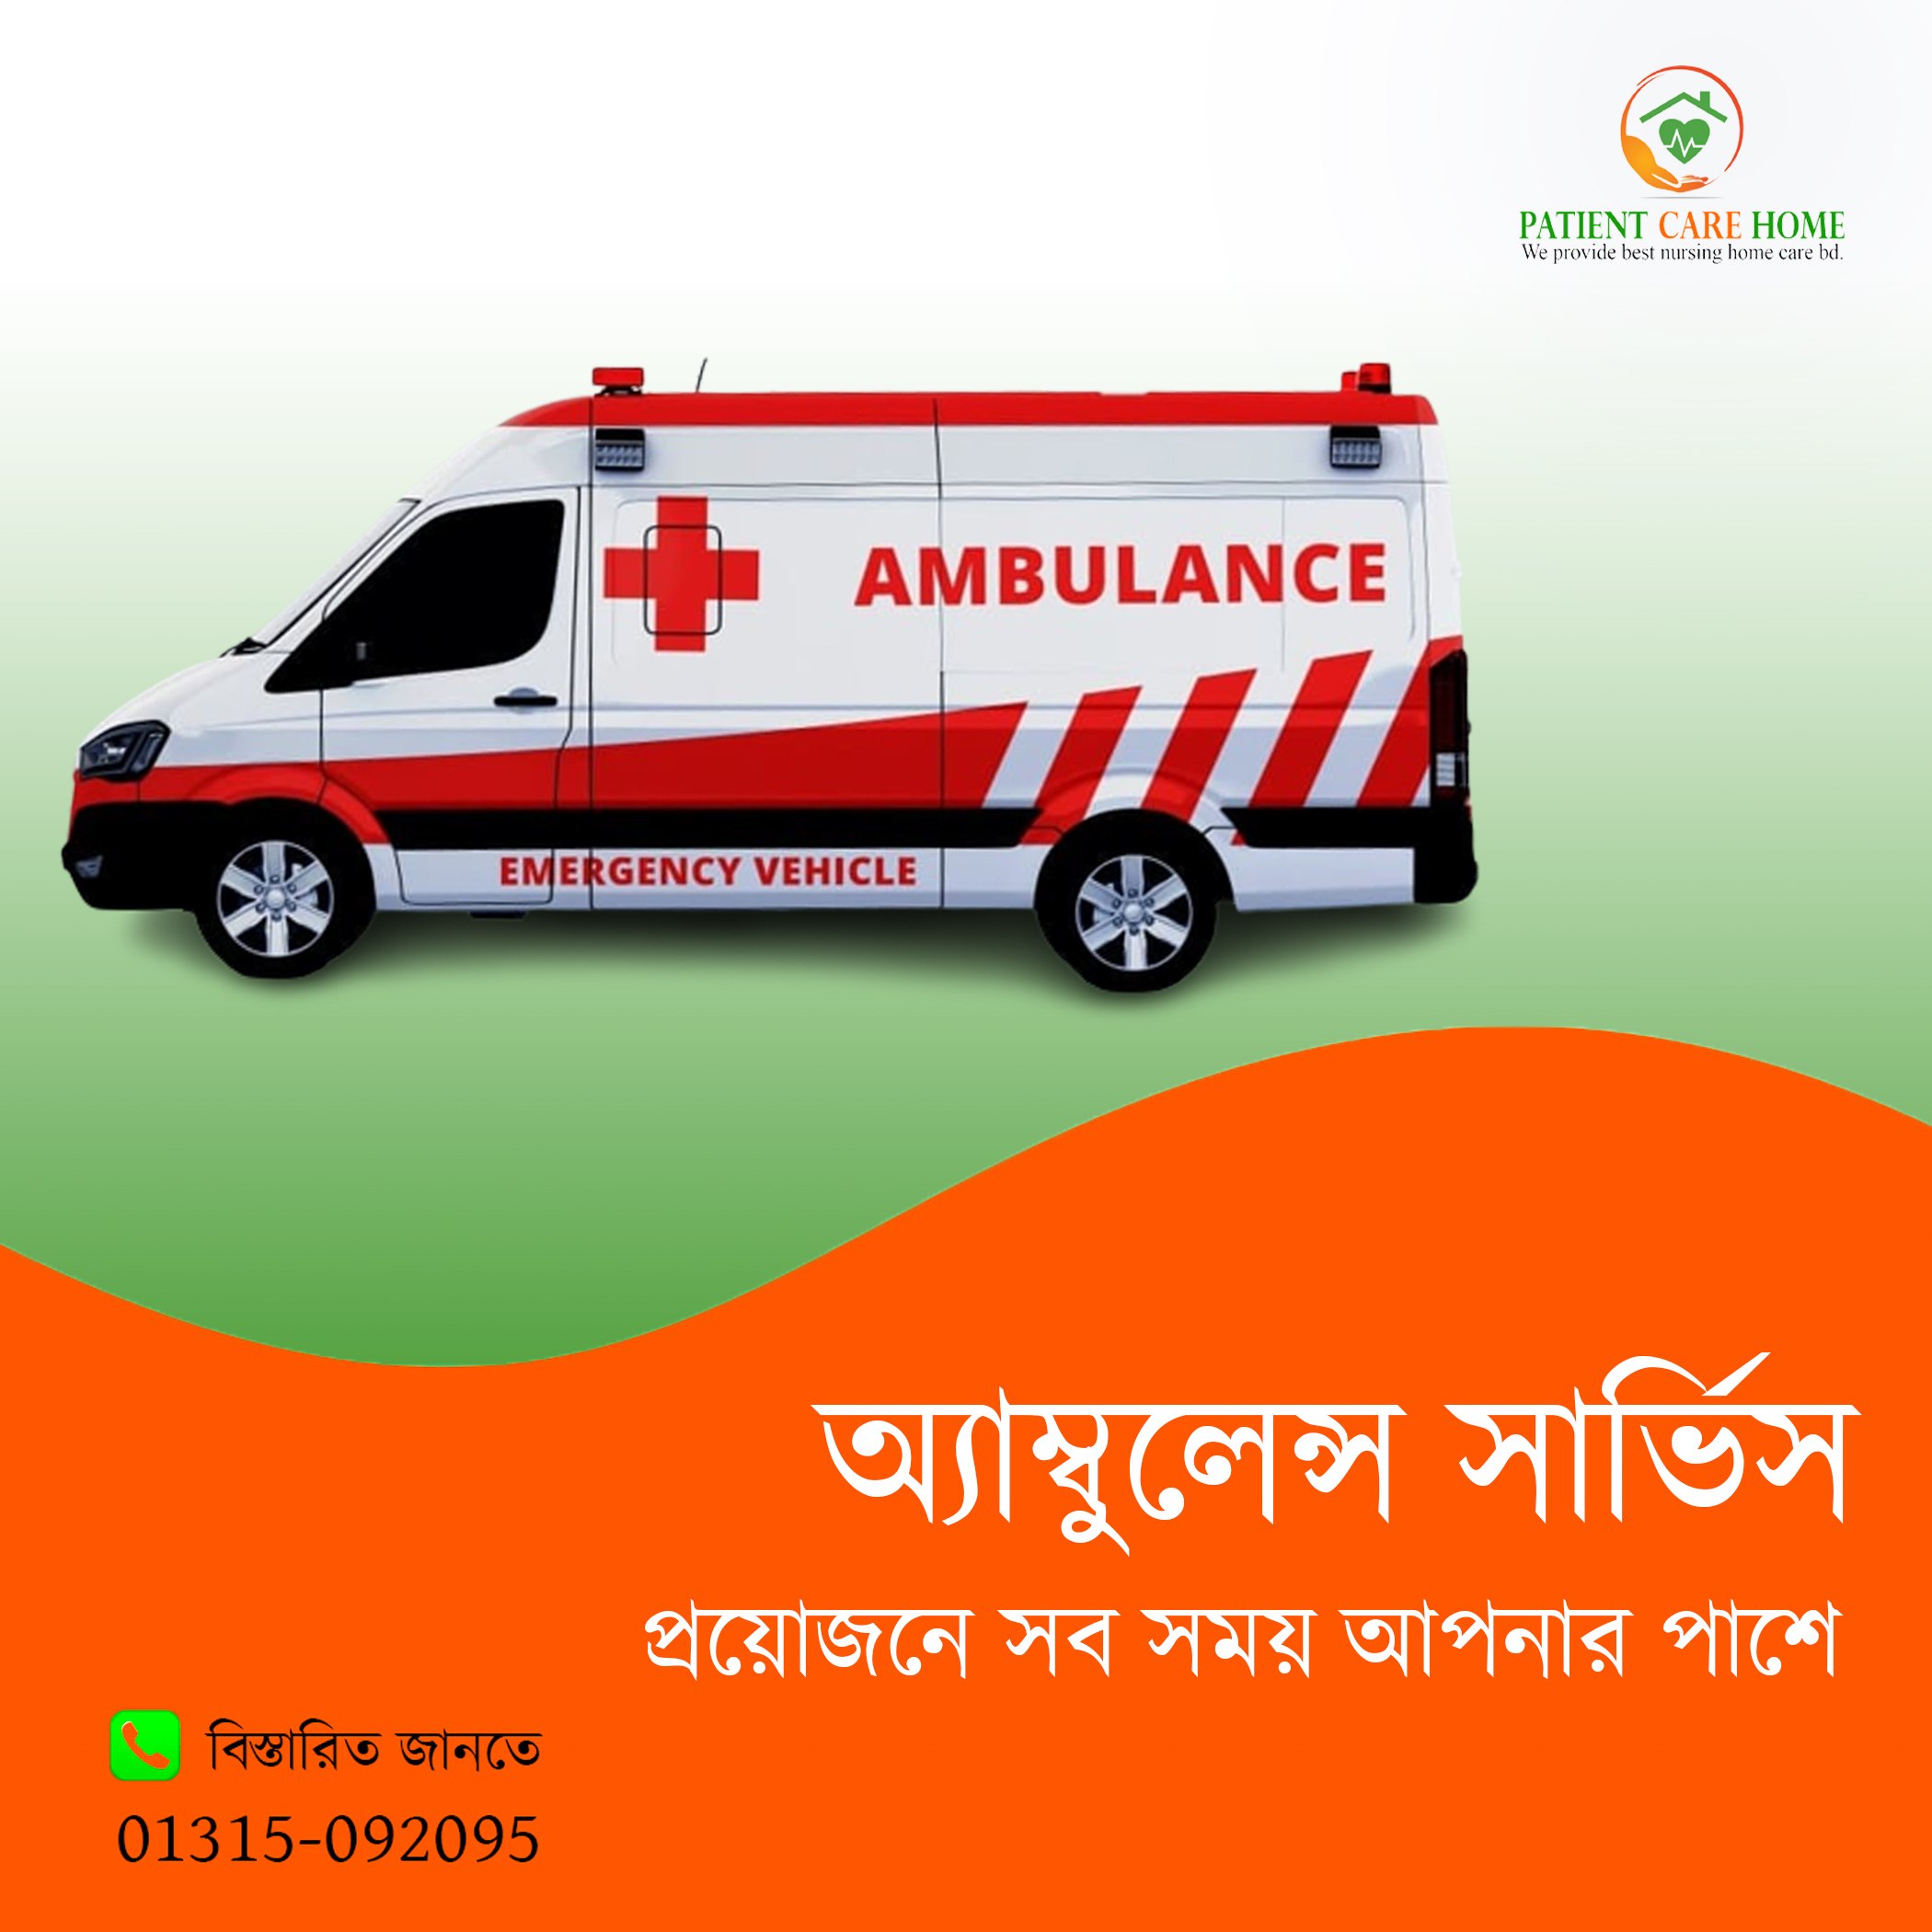 ambulance-services-in-dhaka-bangladesh-patient-care-home-bd